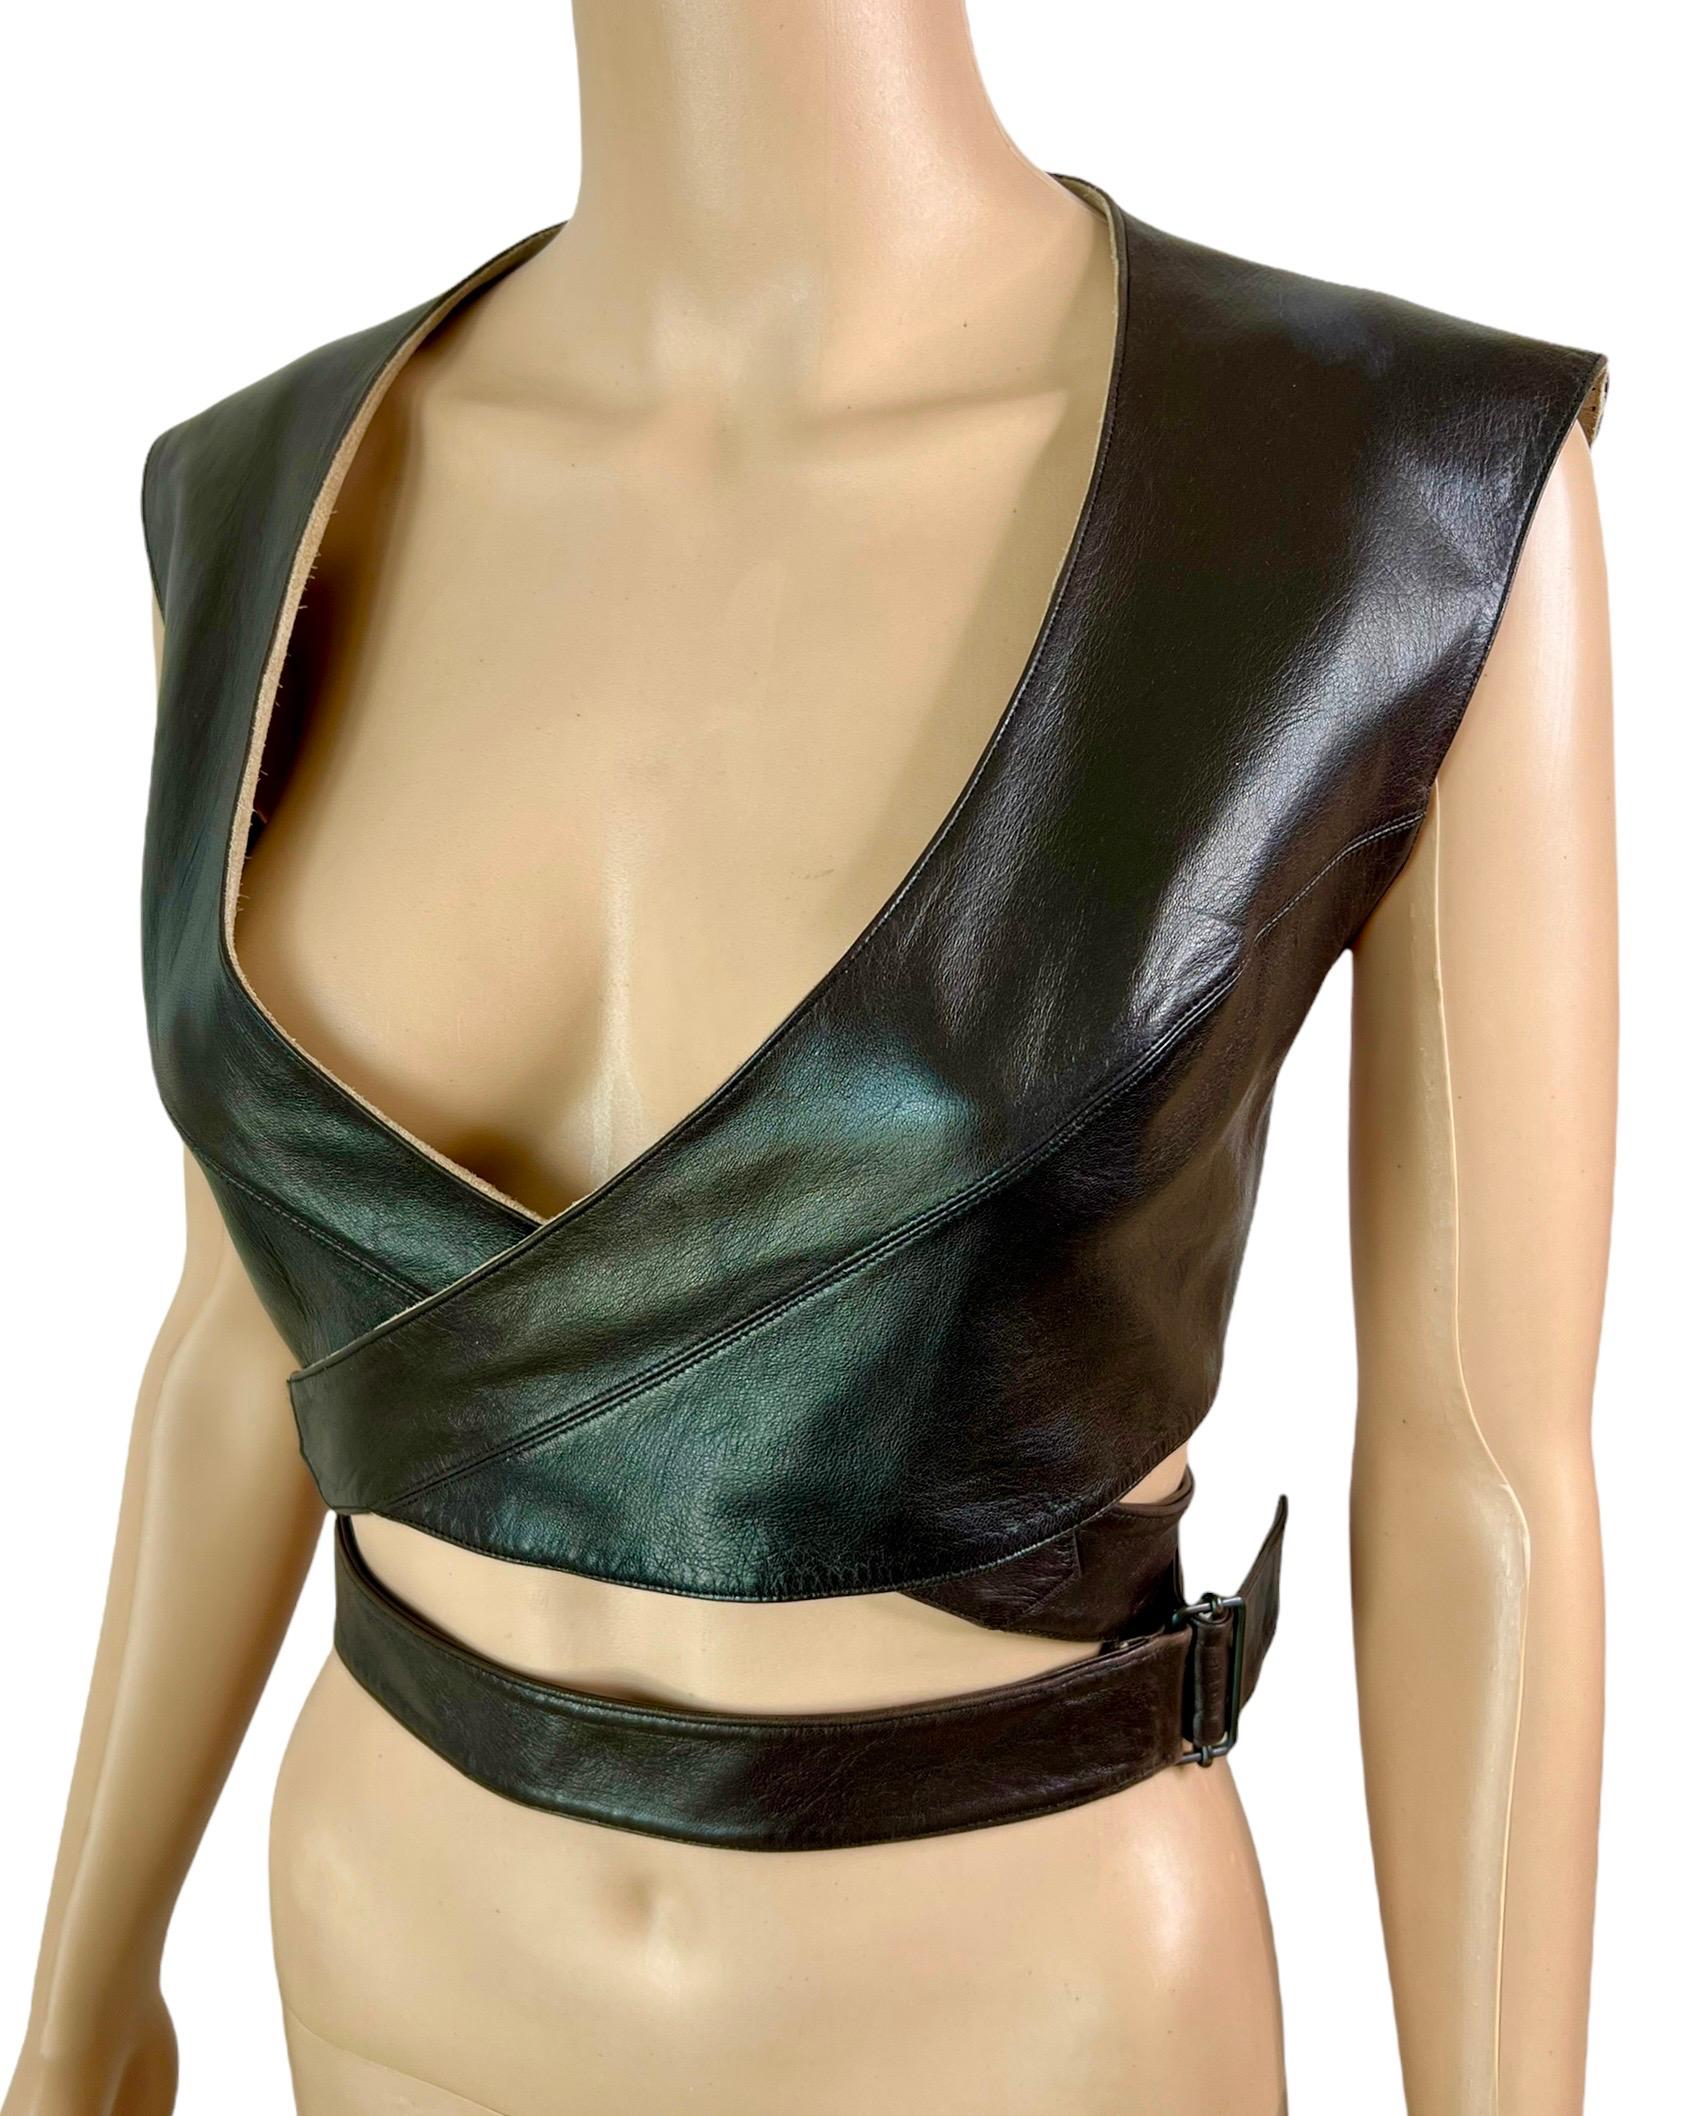 Azzedine Alaia F/W 1983 Vintage Leather Cutout Wrap Bra Crop Top FR 40

Azzedine Alaia vintage leather wrap bra top featuring wraparound design, belted at the waist for an adjustable fit.

